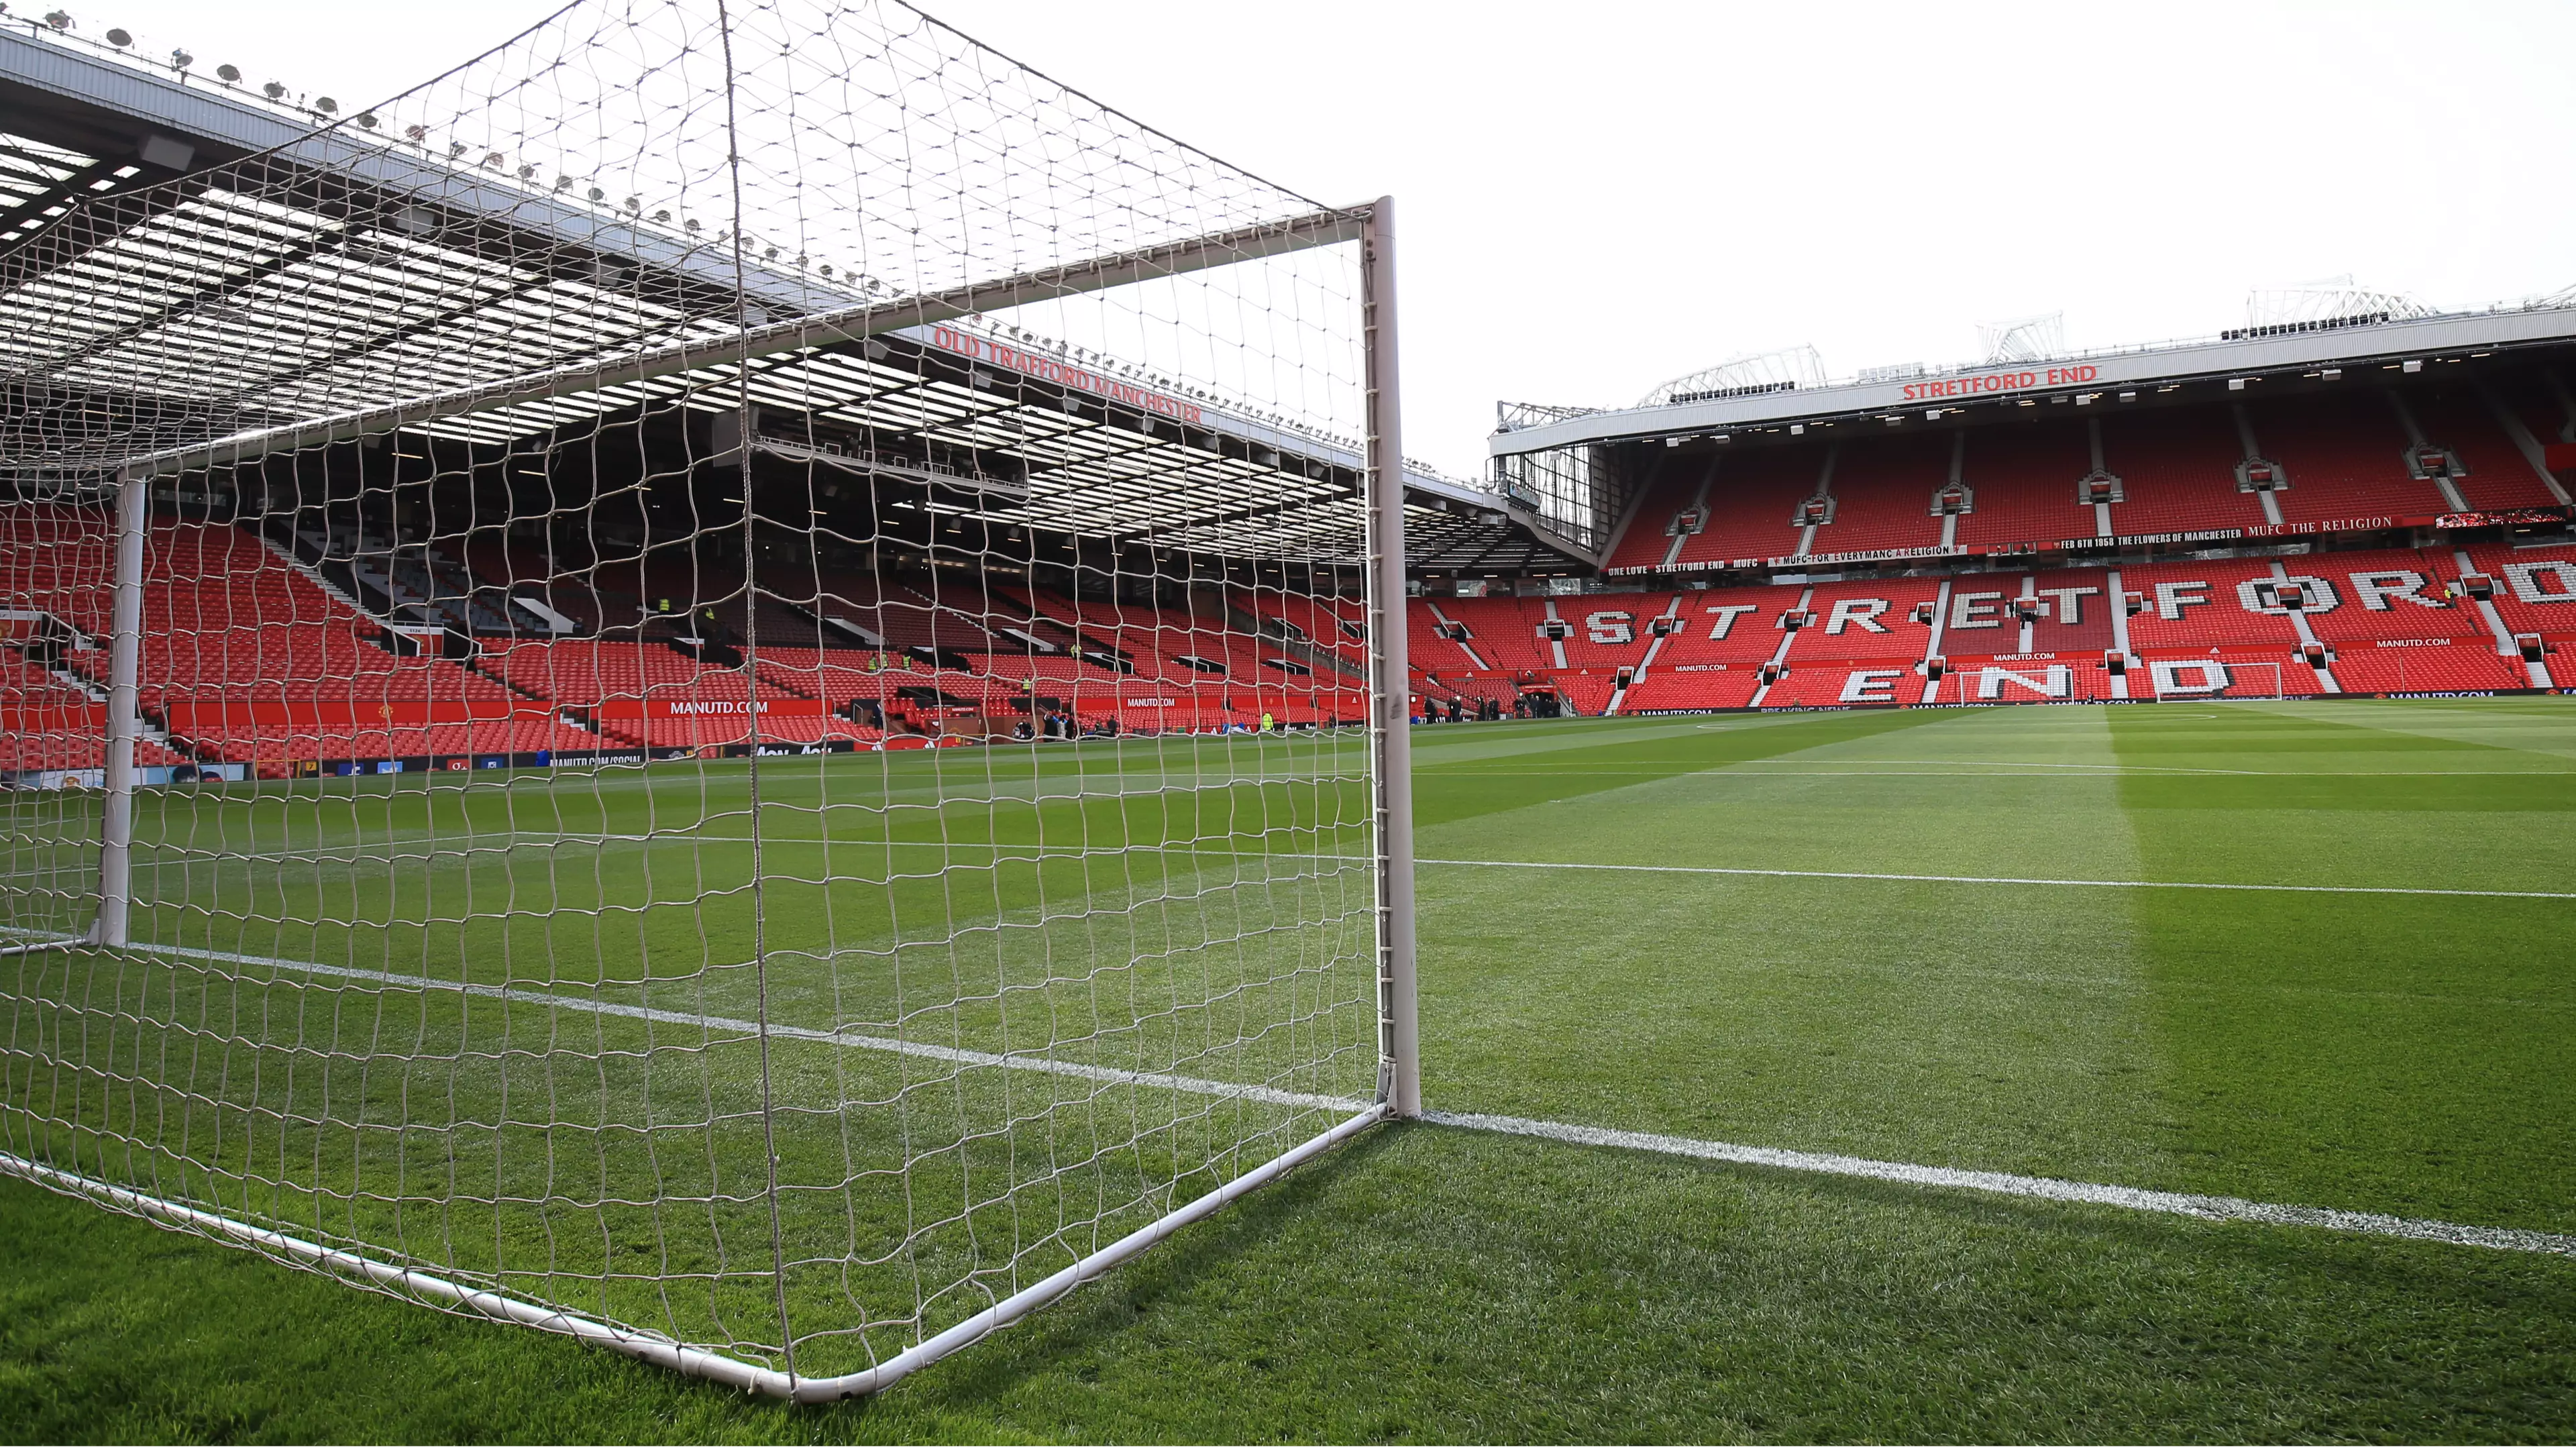 Manchester United To Introduce 'Atmosphere Section' At Old Trafford This Season